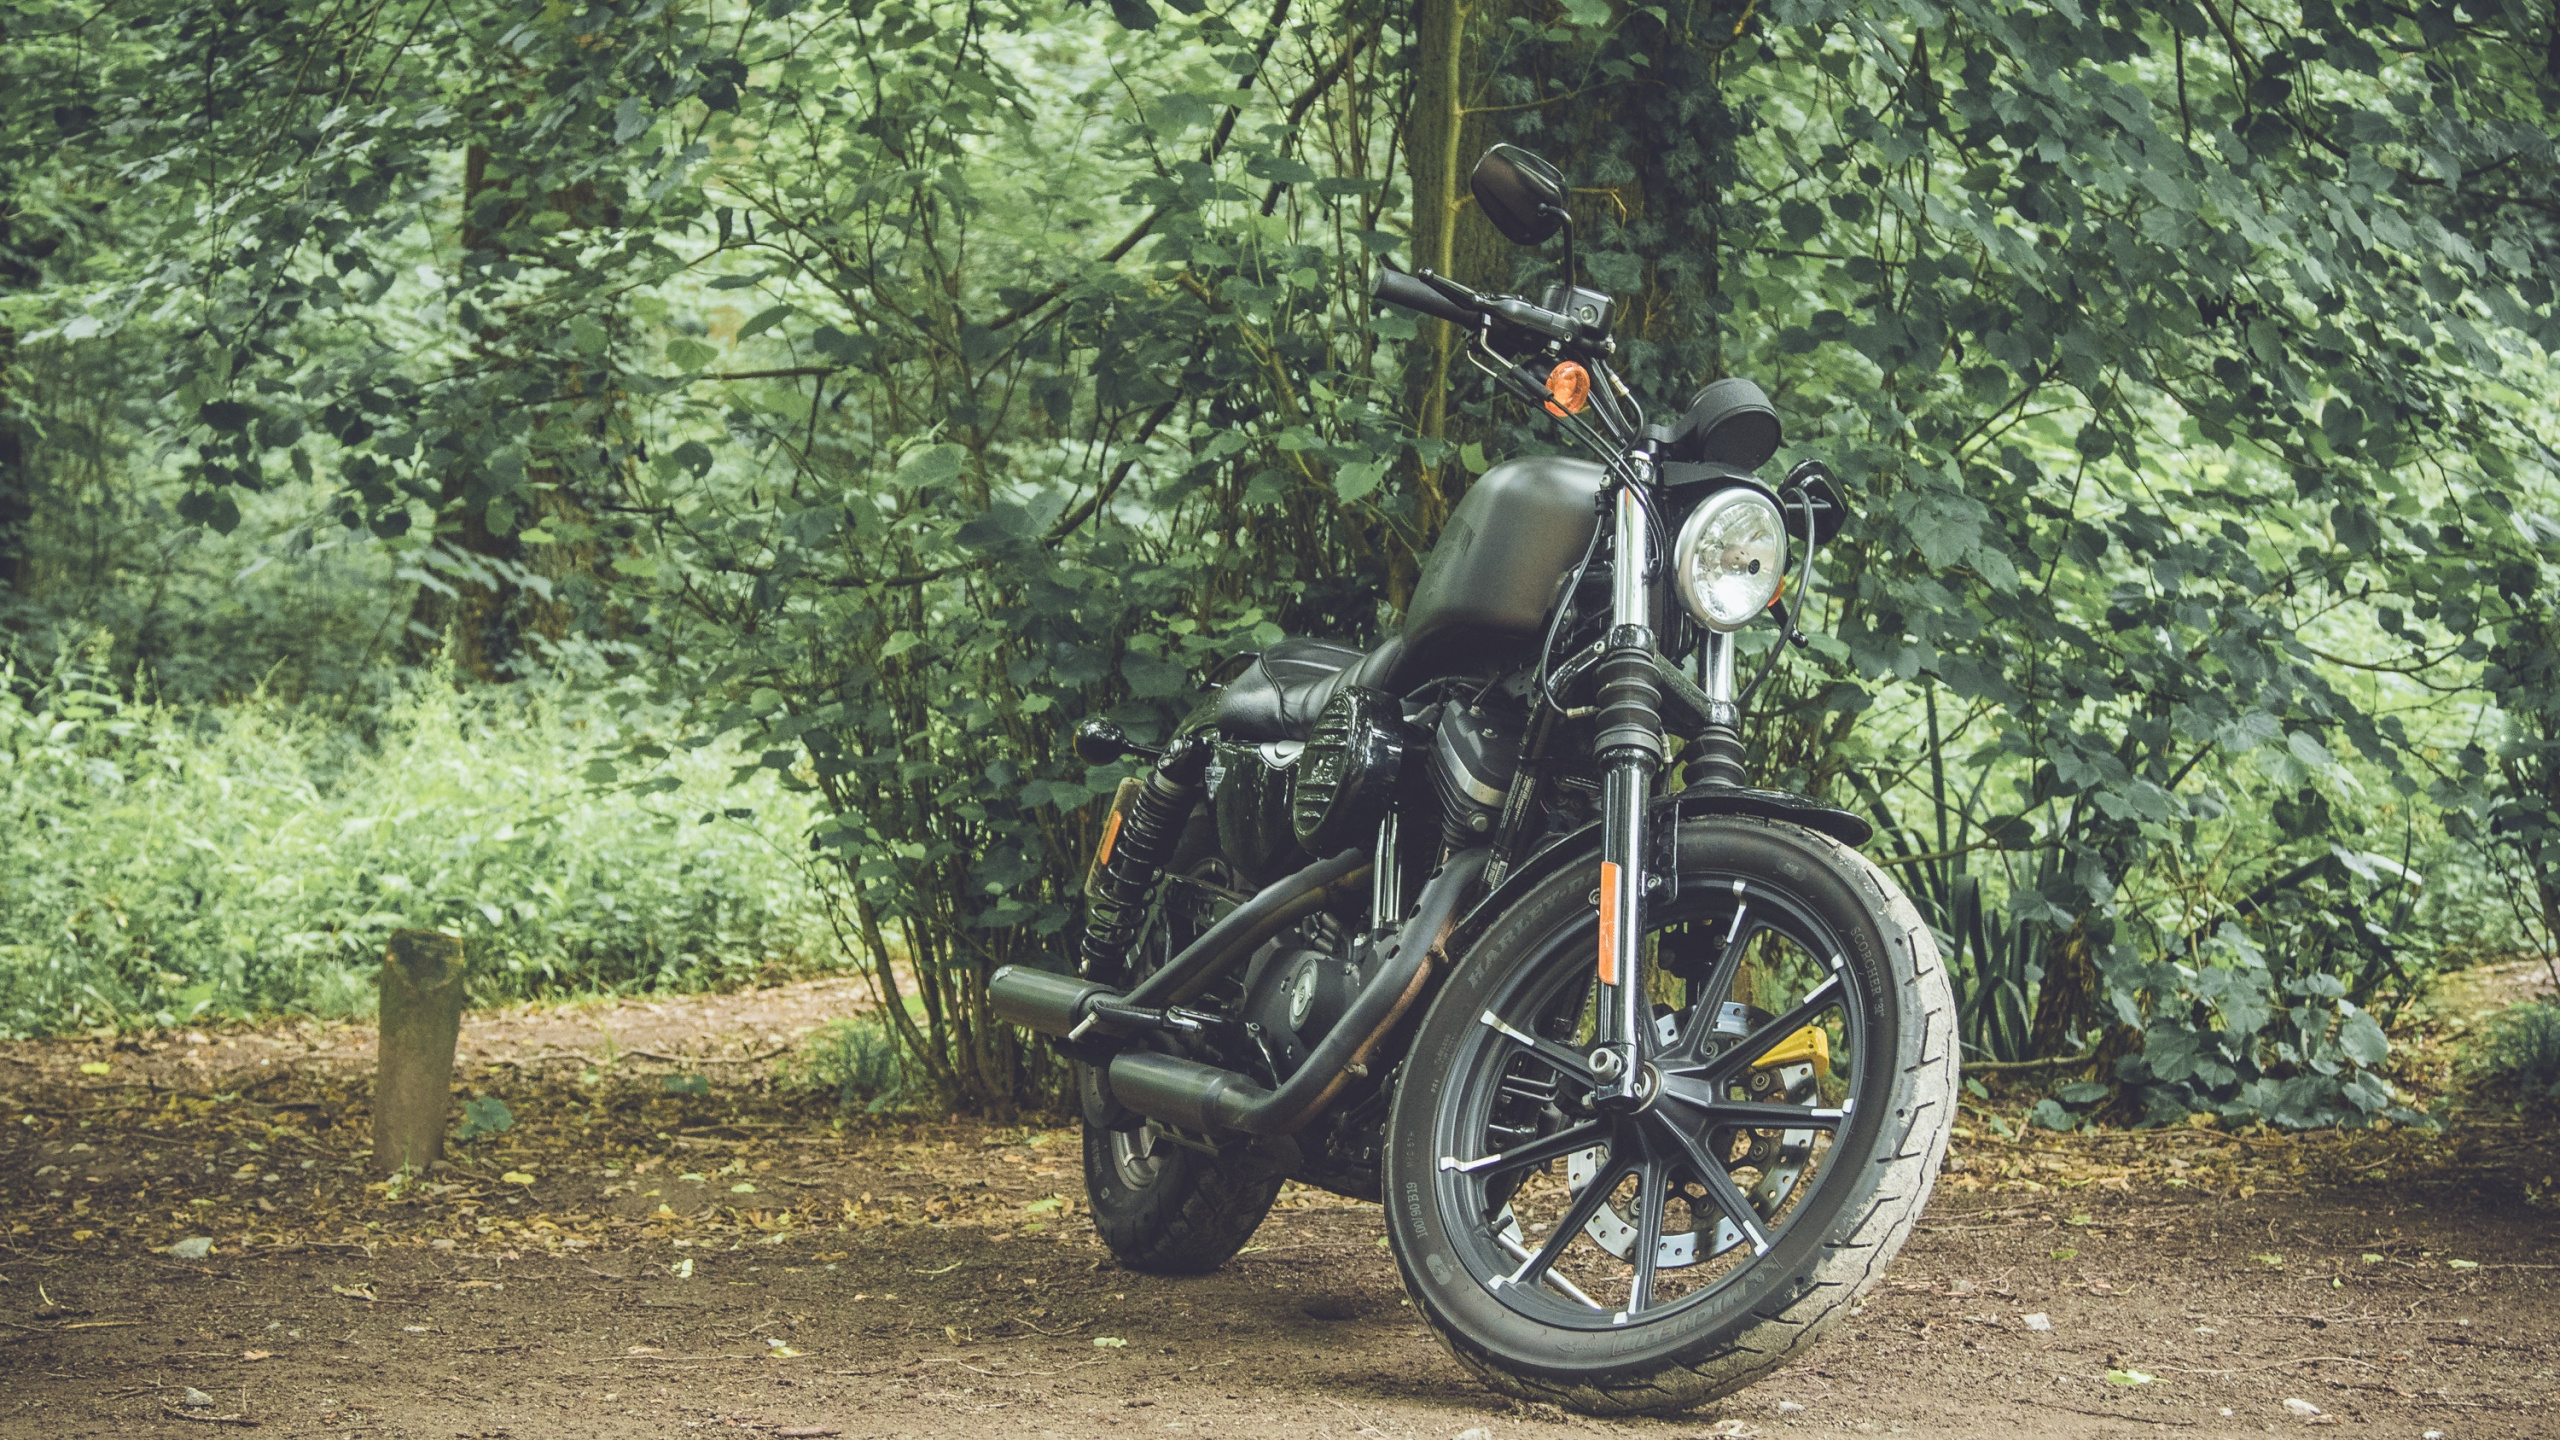 Black Motorcycle Parked on Dirt Road in Between Green Trees During Daytime. Wallpaper in 2560x1440 Resolution